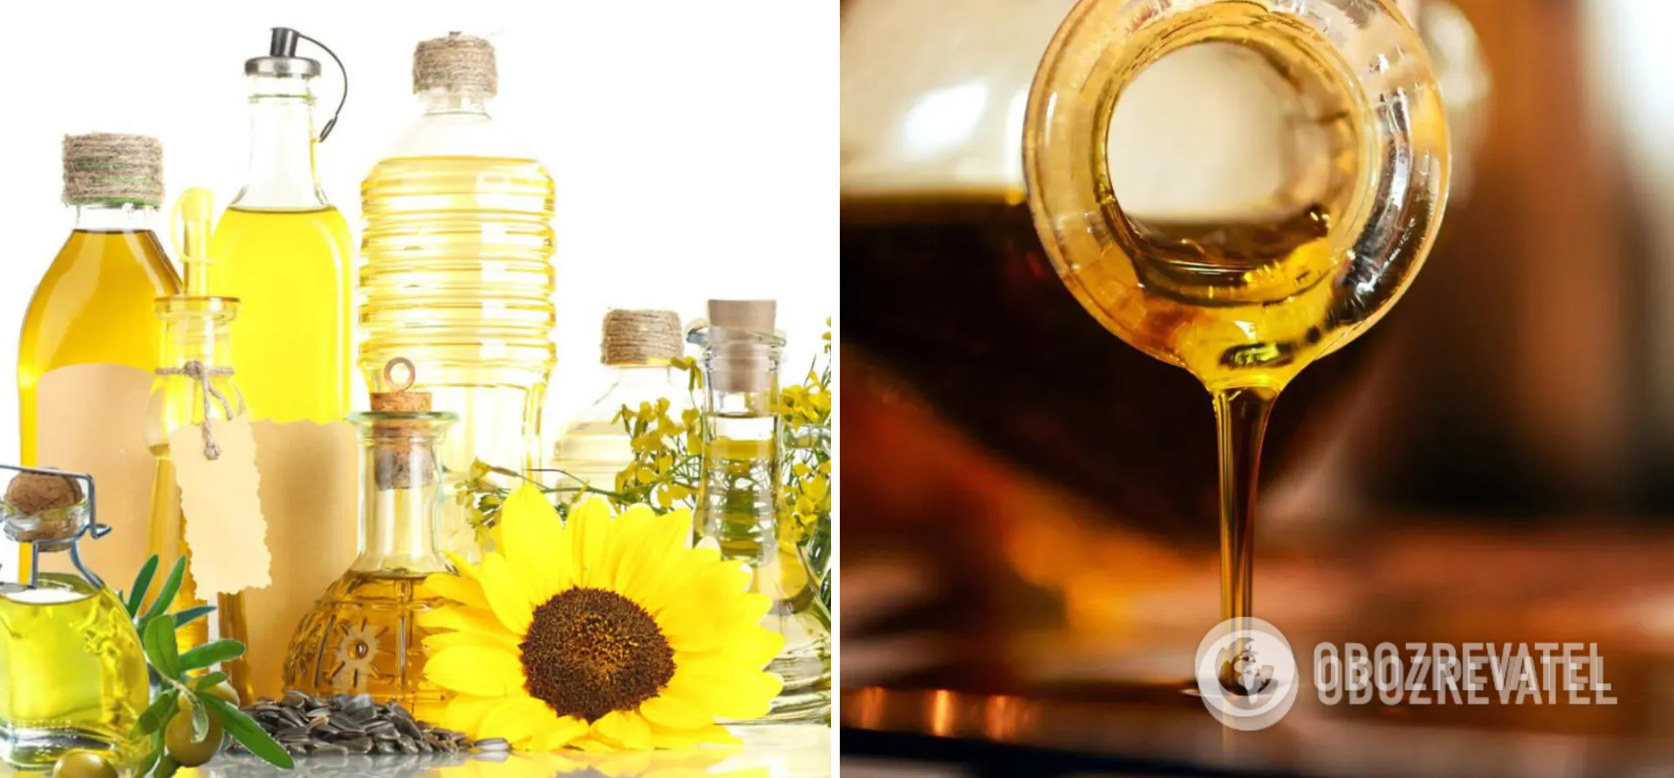 How to check vegetable oil for quality at home